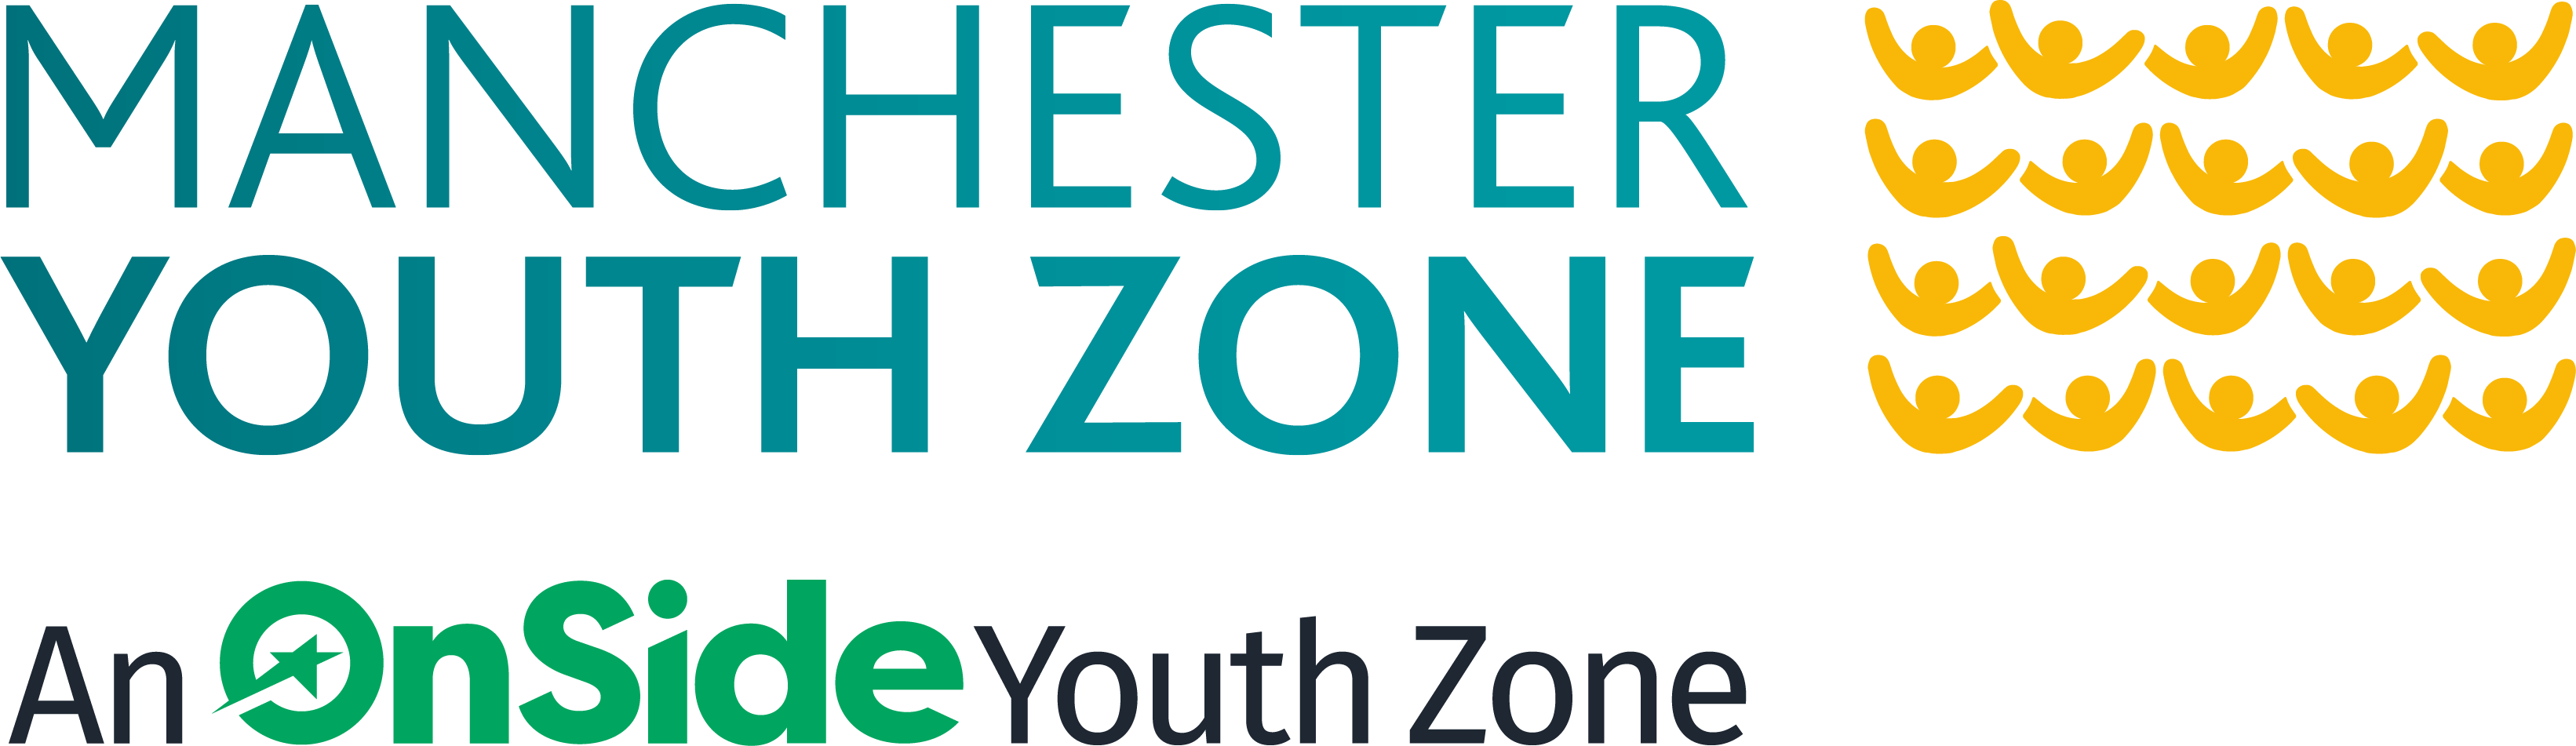 logo for Manchester Youth Zone